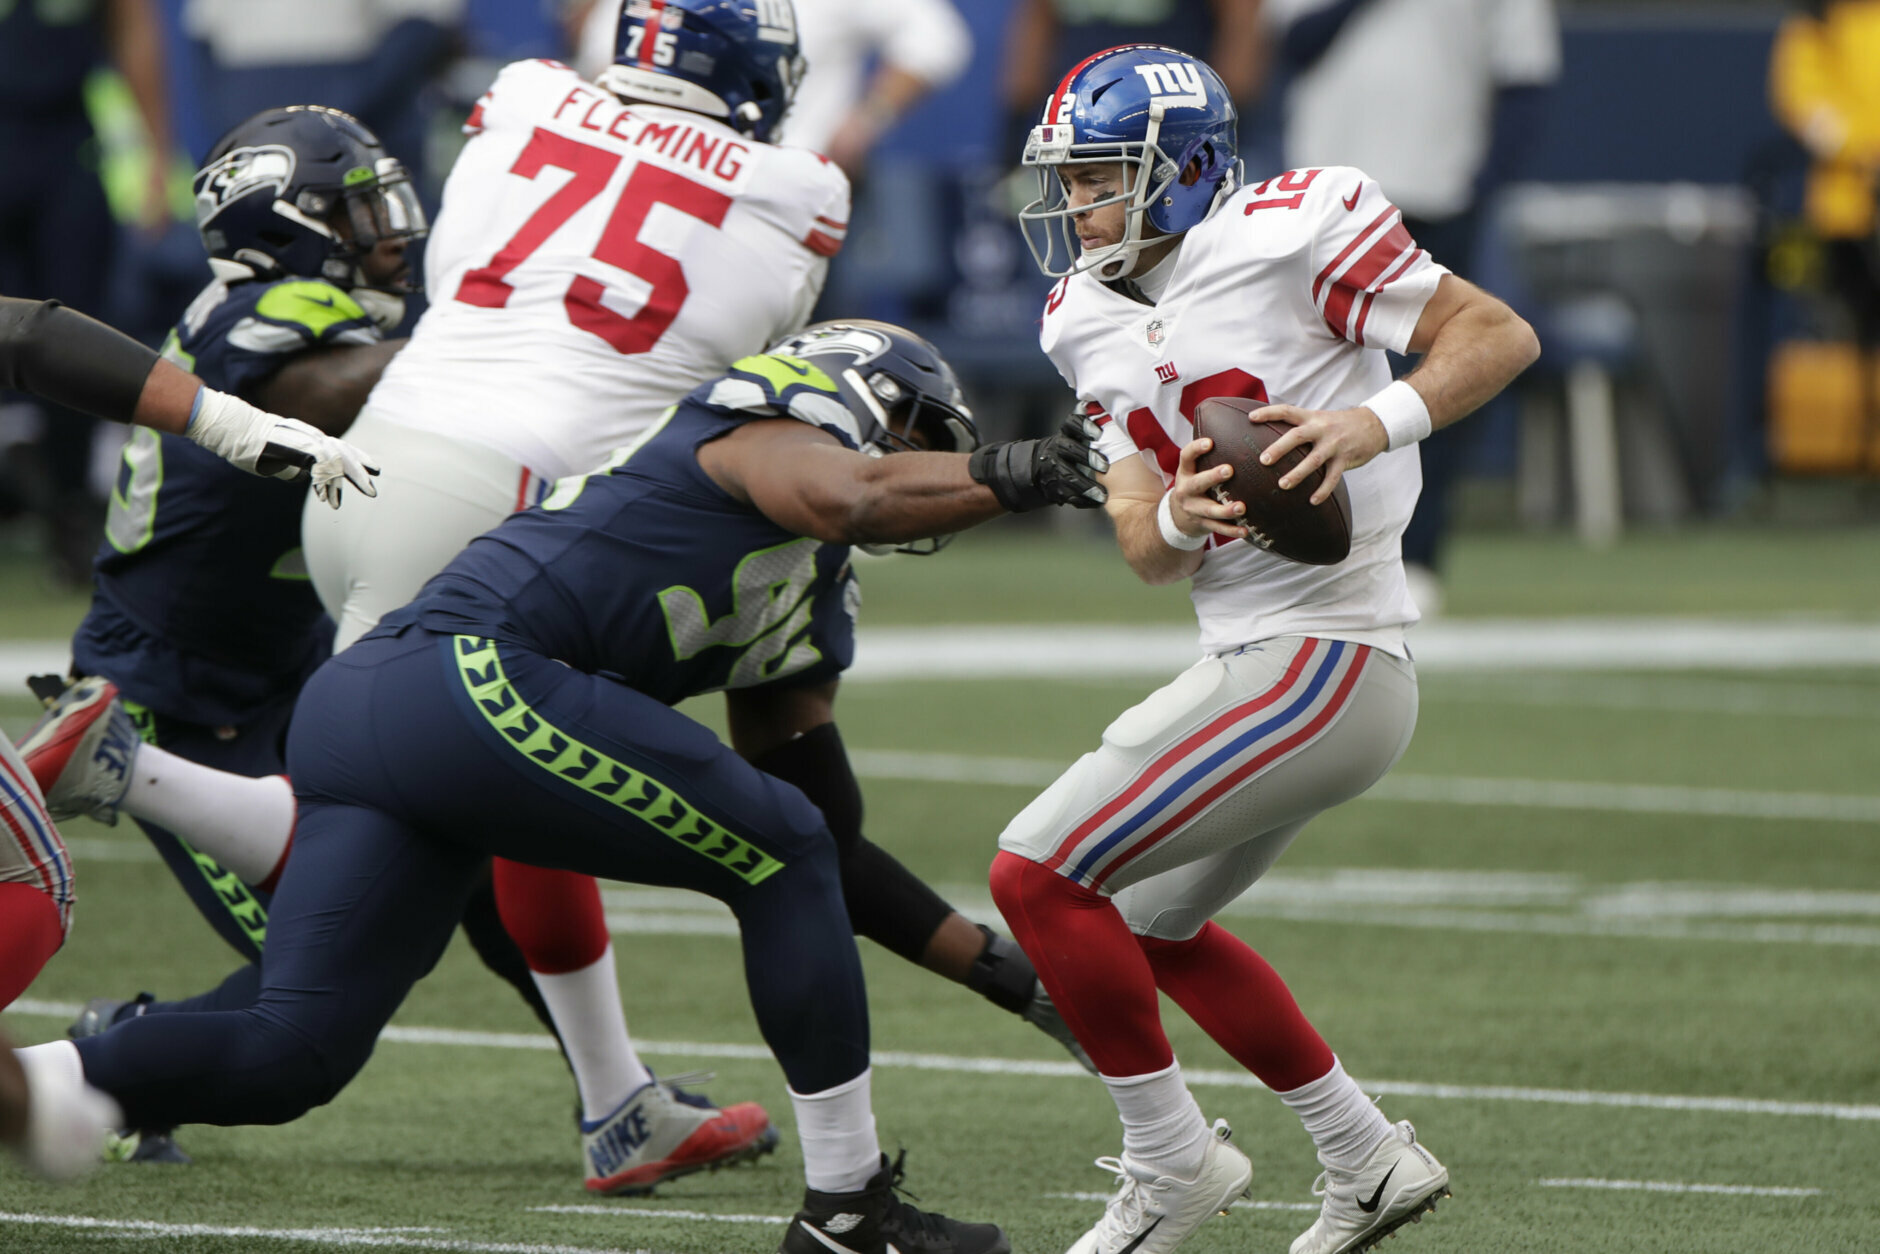 <p><b><i>Giants 17</i></b><br />
<b><i>Seahawks 12</i></b></p>
<p>Yes, this score is correct.</p>
<p>In the upset of the day (and perhaps, the week), Big Blue became the first NFC East team this year to beat a team with a winning record — and did so with Washington castoffs Alfred Morris and Colt McCoy, who got his first win under center since &#8230; <a href="https://youtu.be/Nn53ApG5P7c">his last improbable road win six years ago</a>. The Giants may be on the brink of <a href="https://twitter.com/ESPNStatsInfo/status/1335747099858587648?s=20">some dubious history,</a> but they might actually be kinda good.</p>
